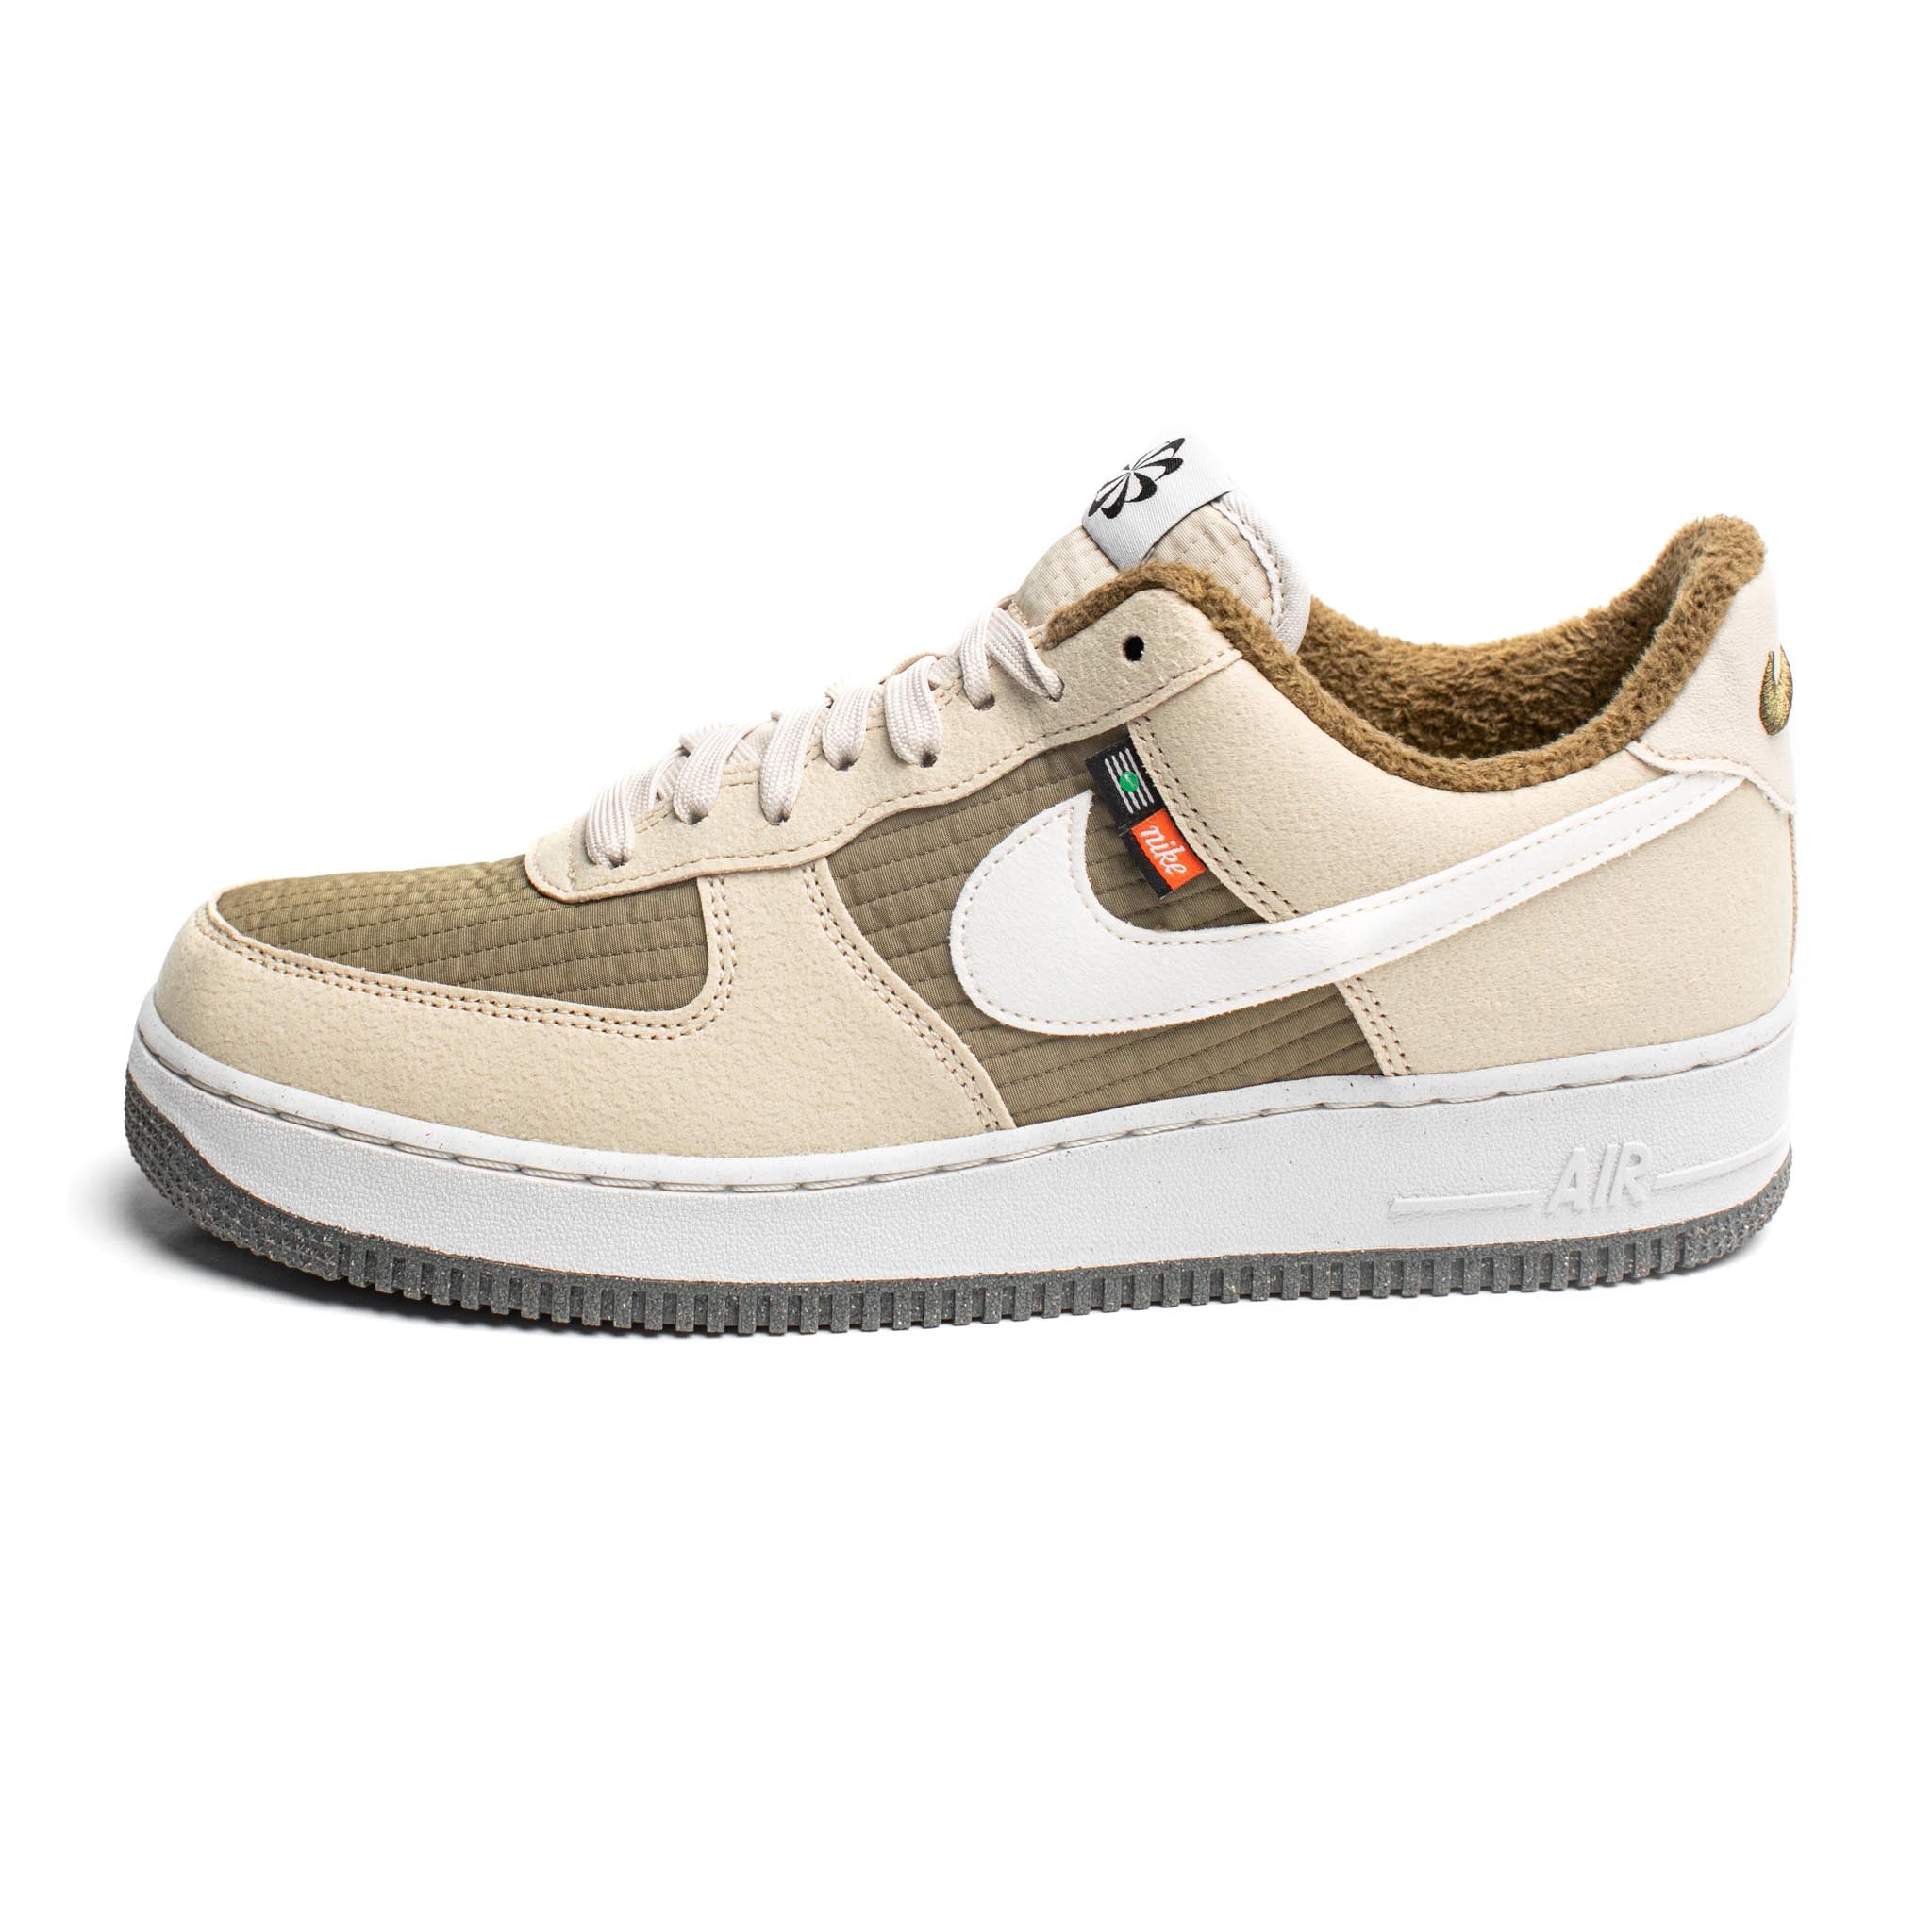 Nike Men's Air Force 1 Low '07 LV8 Toasty Rattan